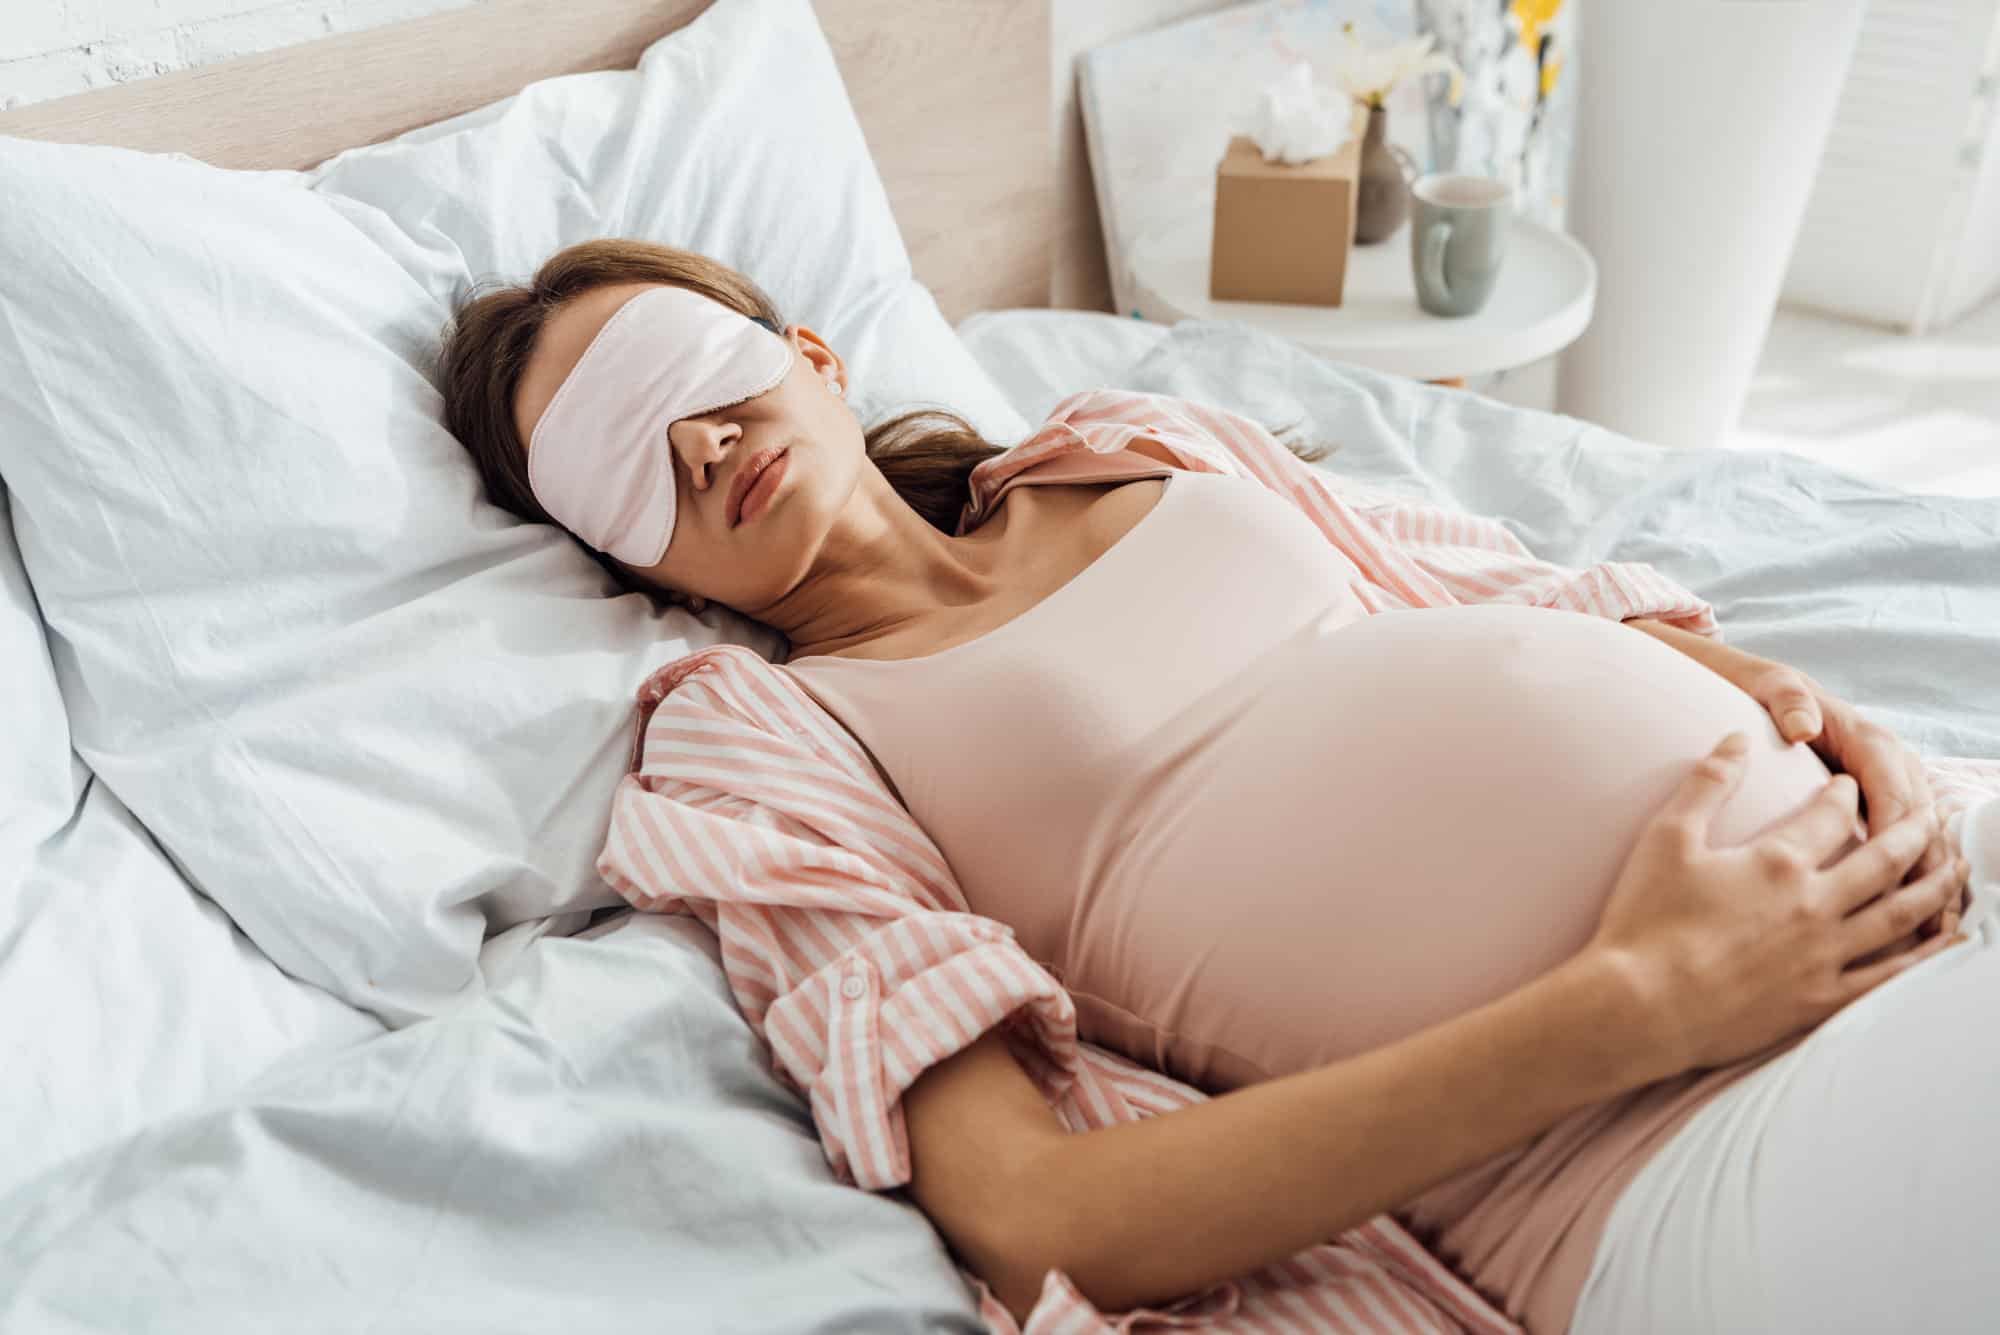 What’s The Best Position To Sleep When Pregnant?